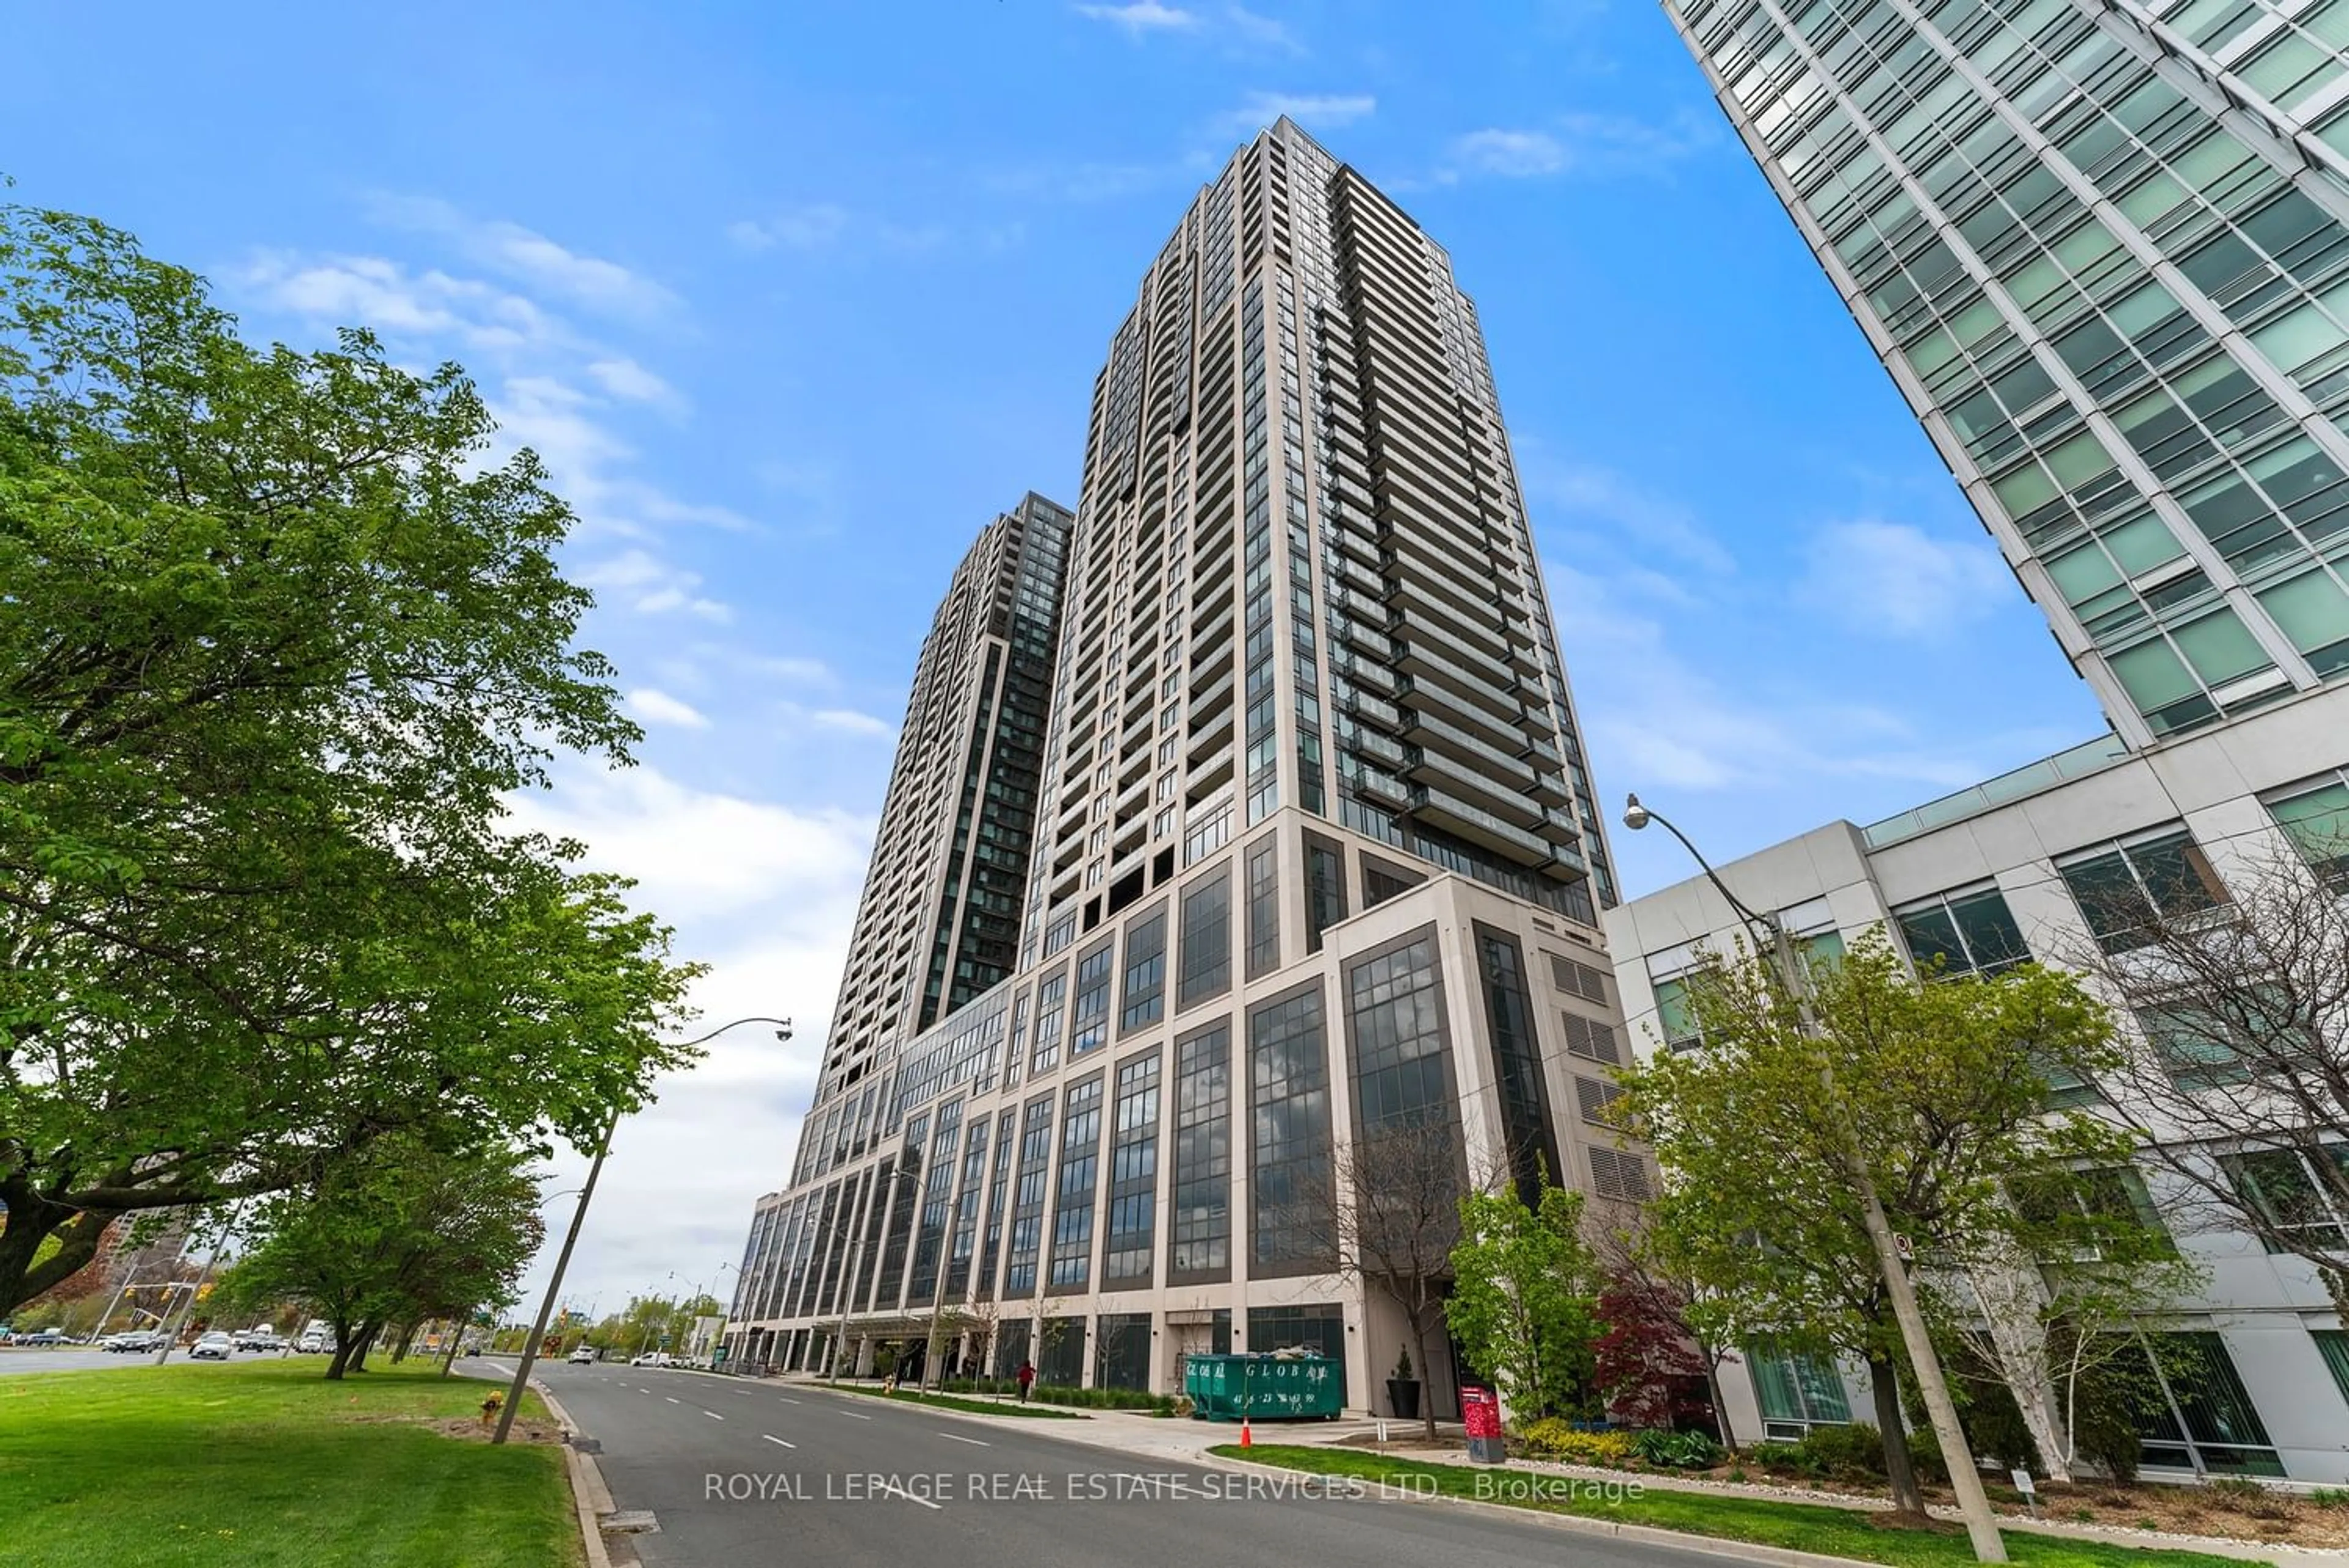 A pic from exterior of the house or condo for 1926 Lake Shore Blvd #1606, Toronto Ontario M6S 1A1